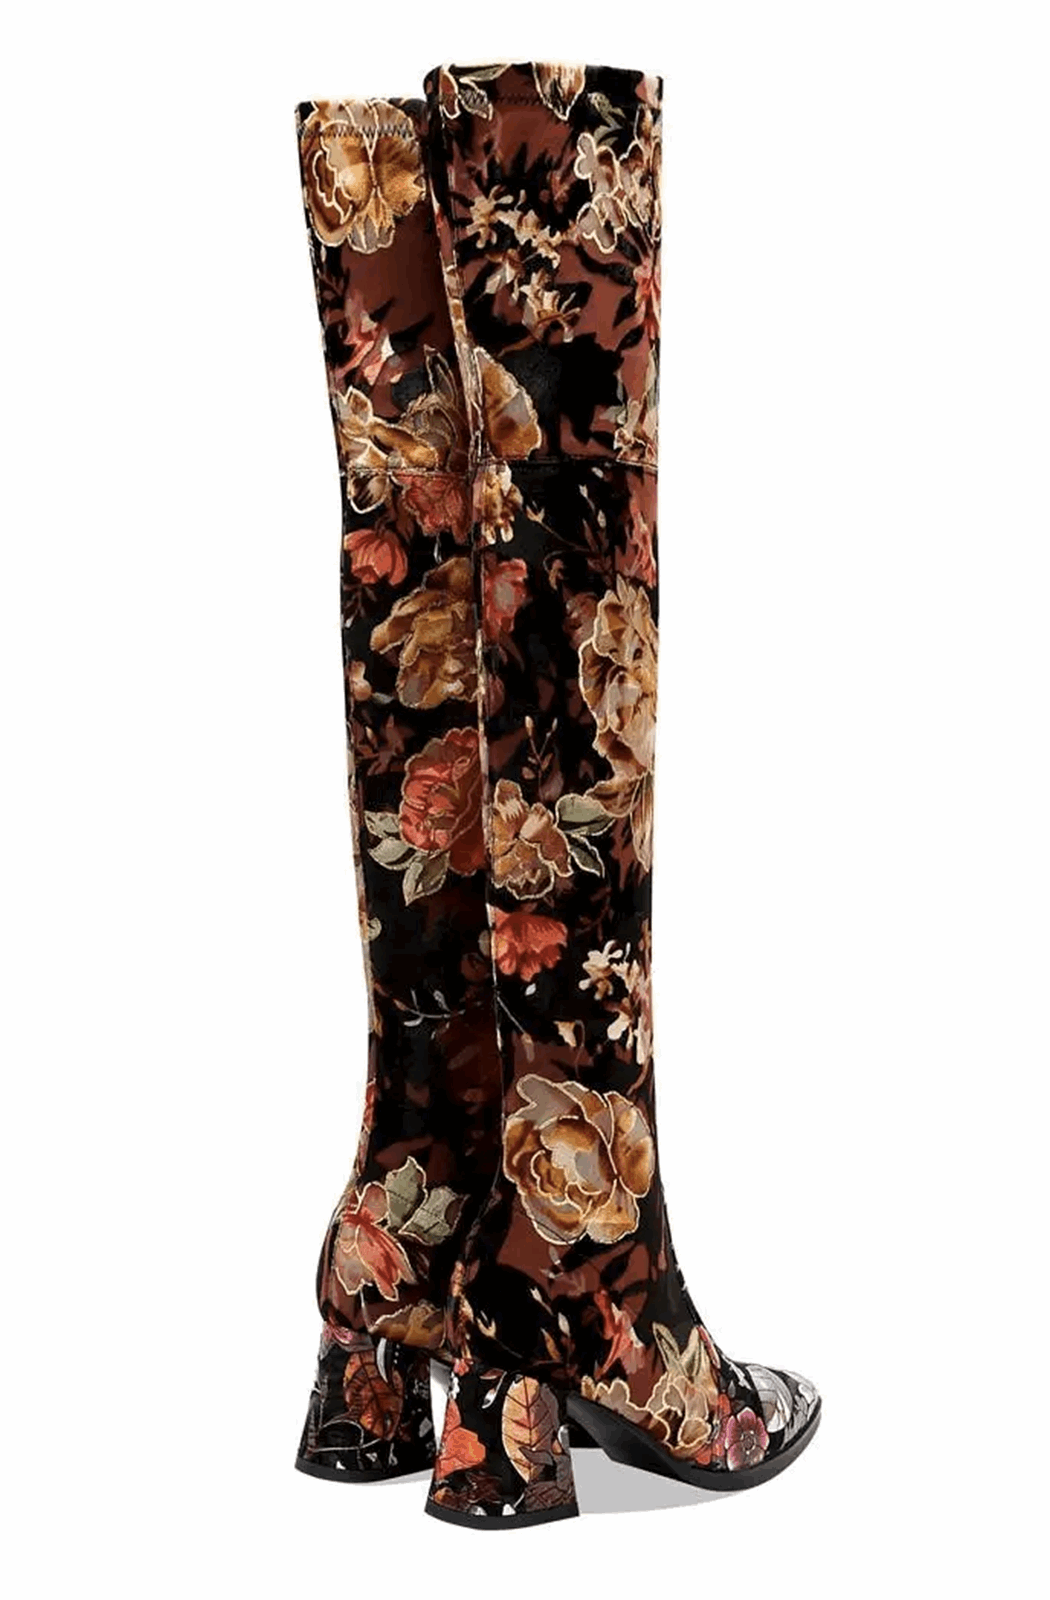 Over the knee boots embroider flower with square heels